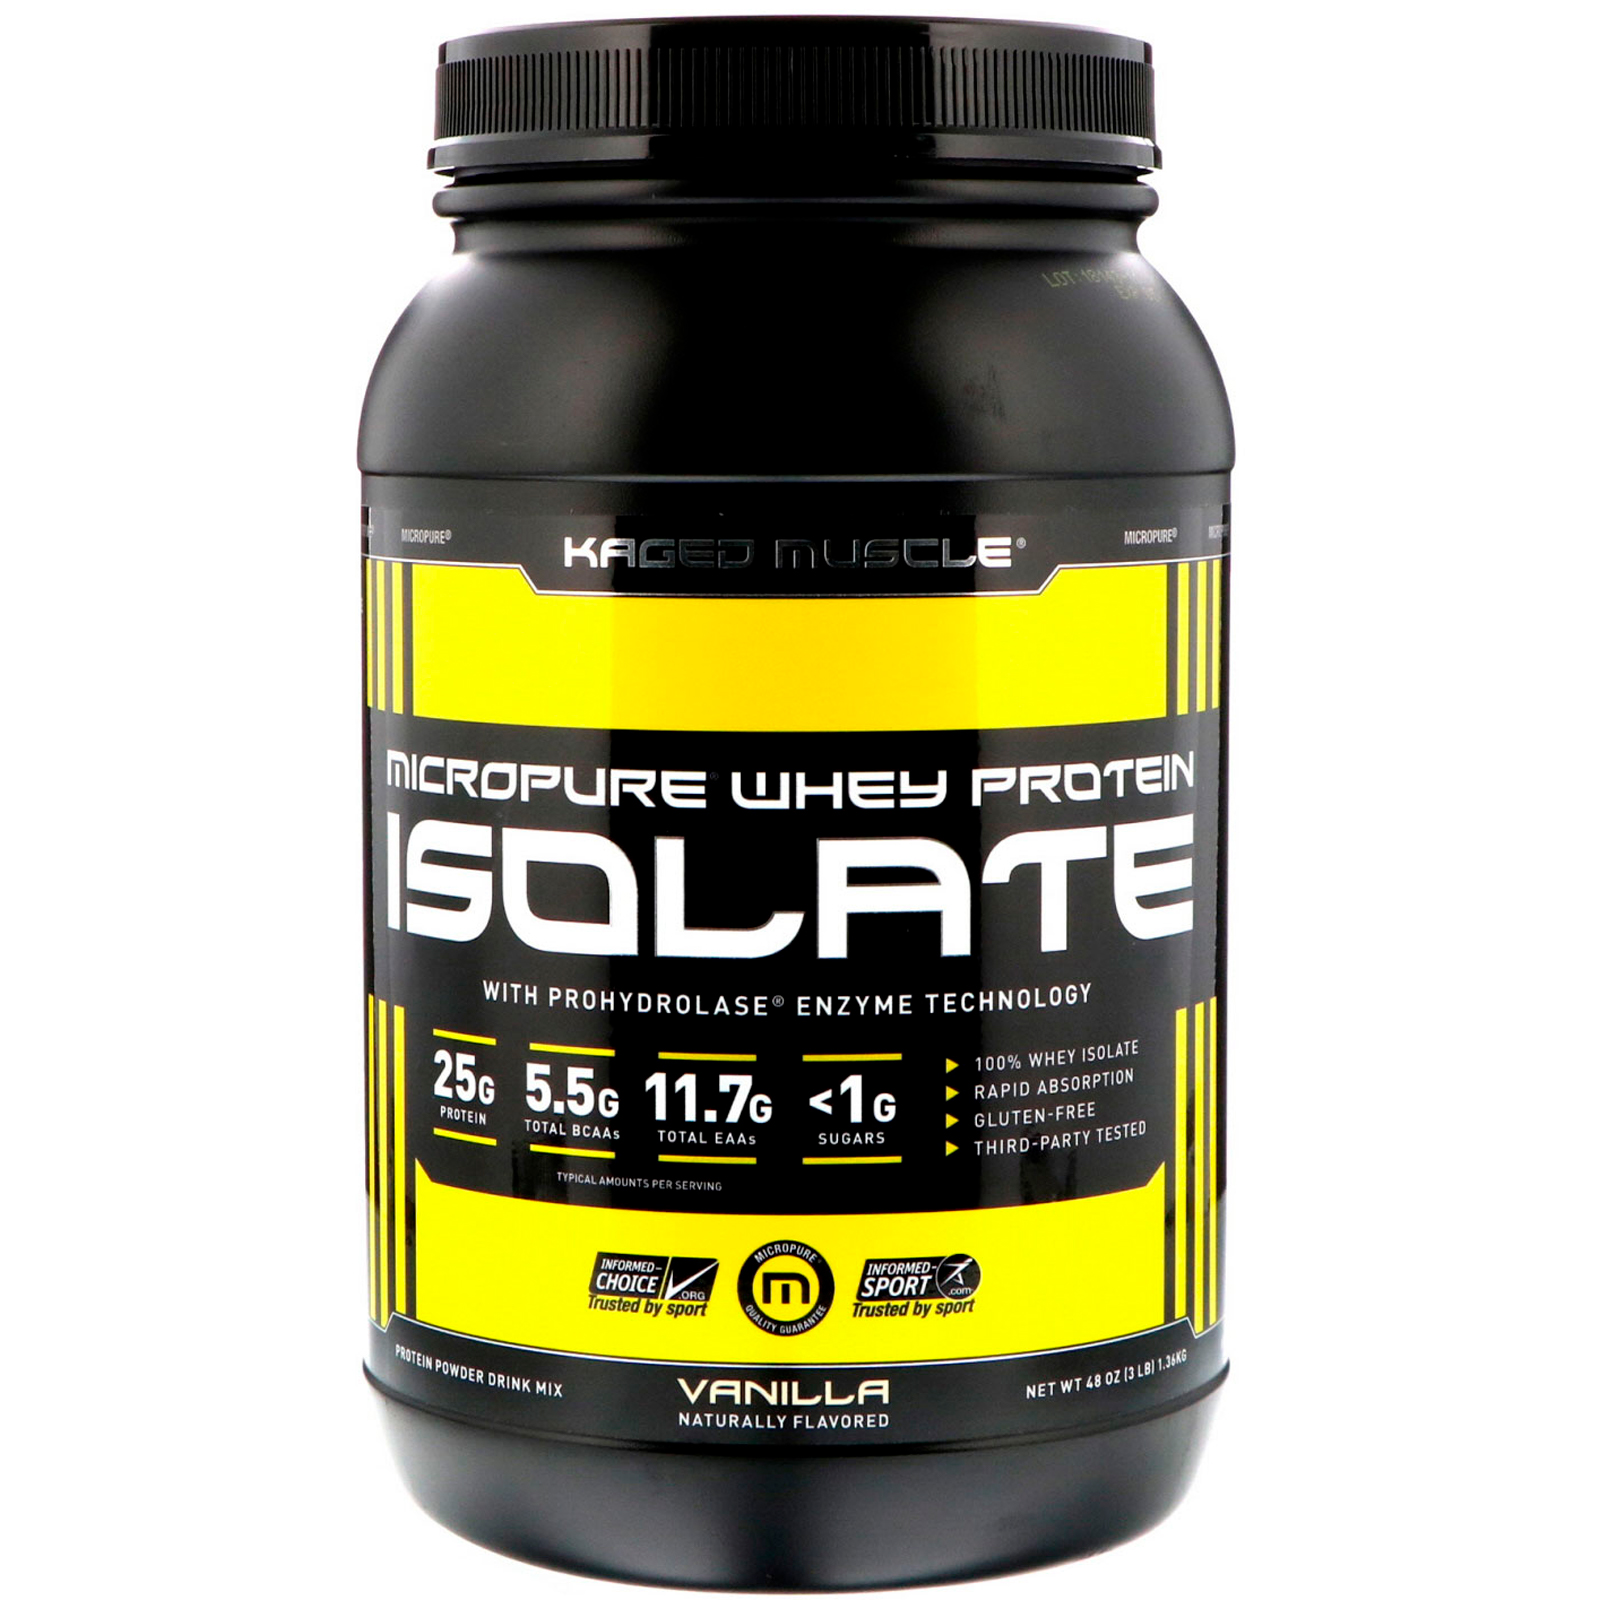 WHEY PROTEIN ISOLATE 3lb vanilla - Kaged Muscle